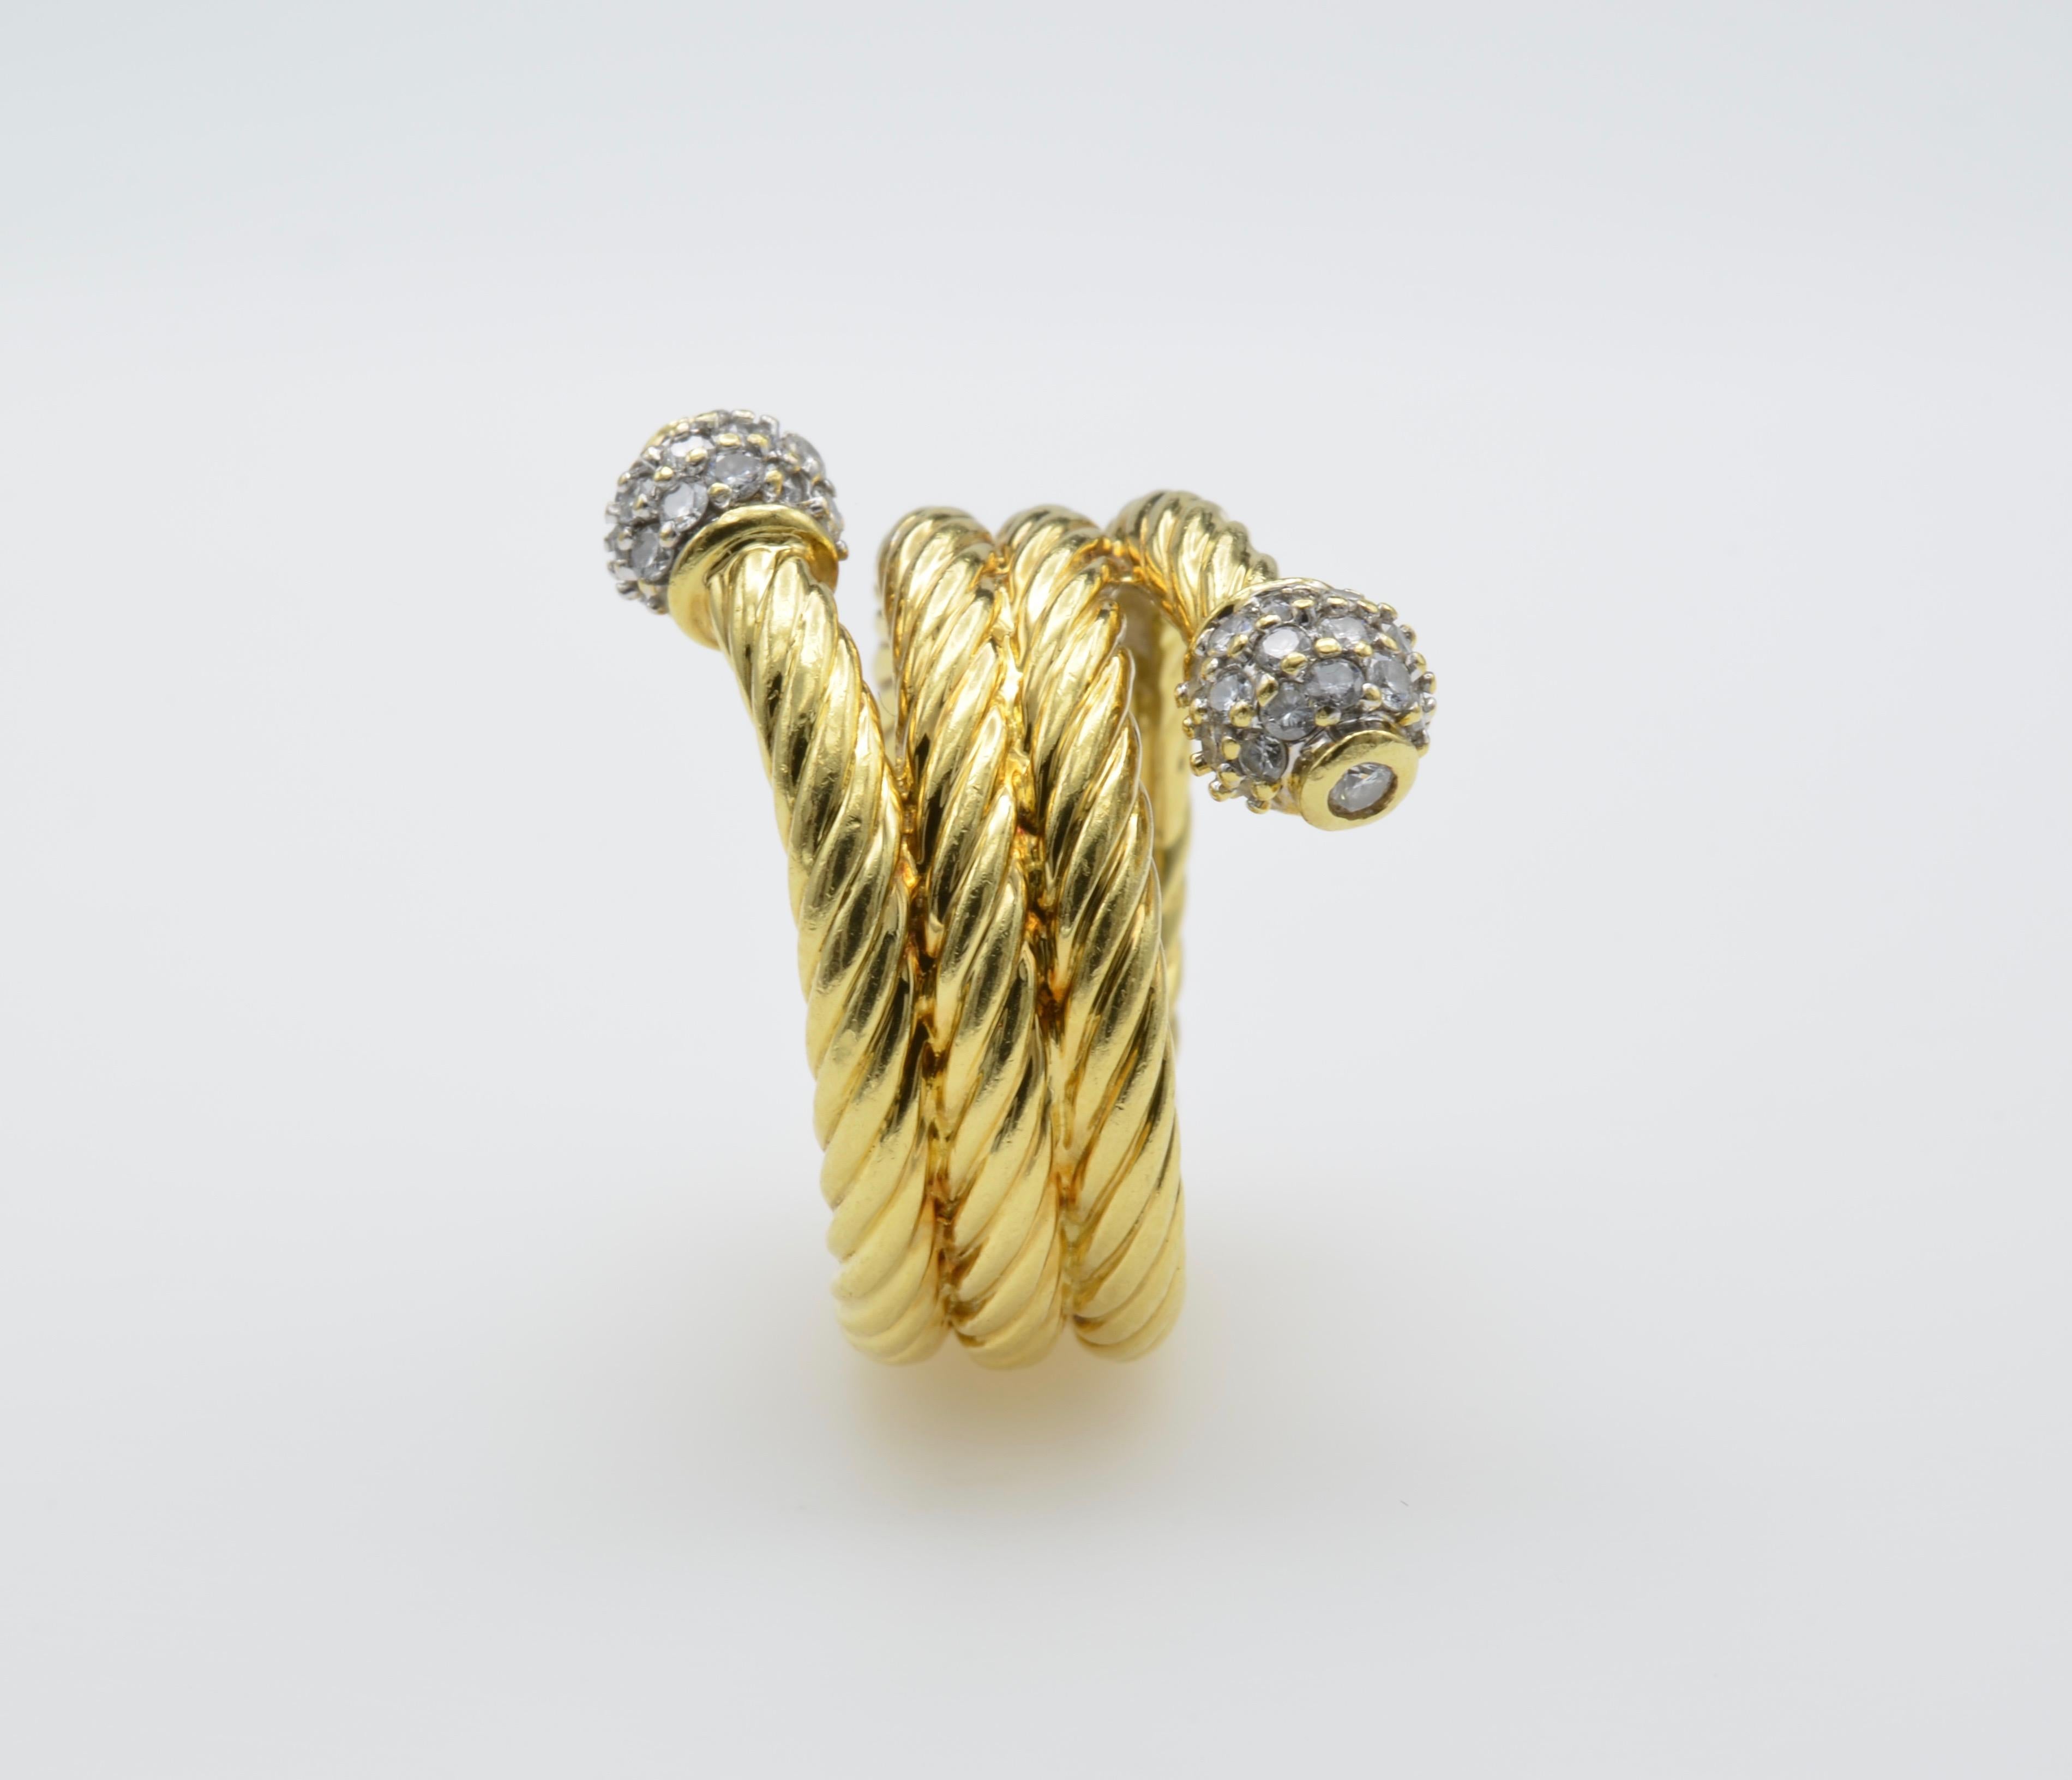 Golden yellow rope wraps around your finger with pave diamond balls on the end. An artistic piece made by David Yurman. There is movement and allure with this classic piece. The texture is divine and the sparkle illustrious. 18 Karat Yellow Gold and